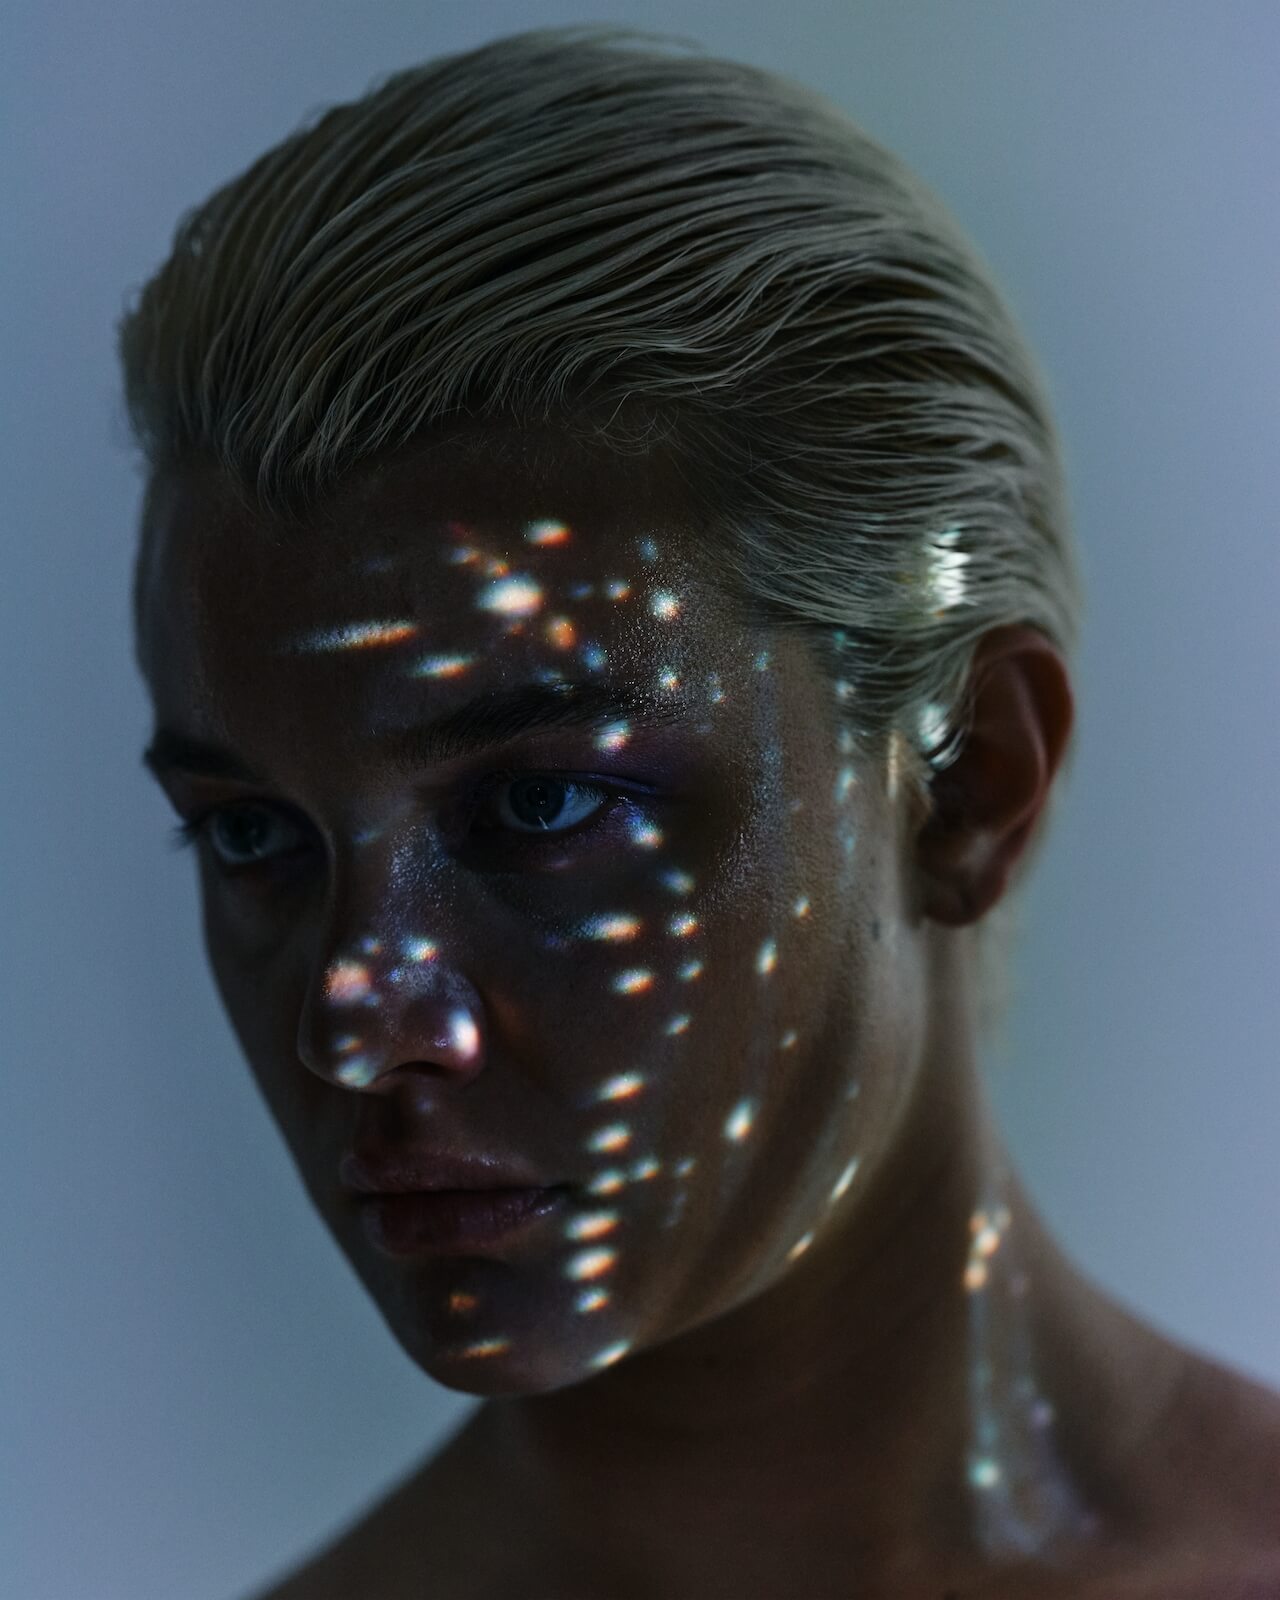 Artistic portrait of a person, their face in darkness apart from speckled lights dancing across their face.